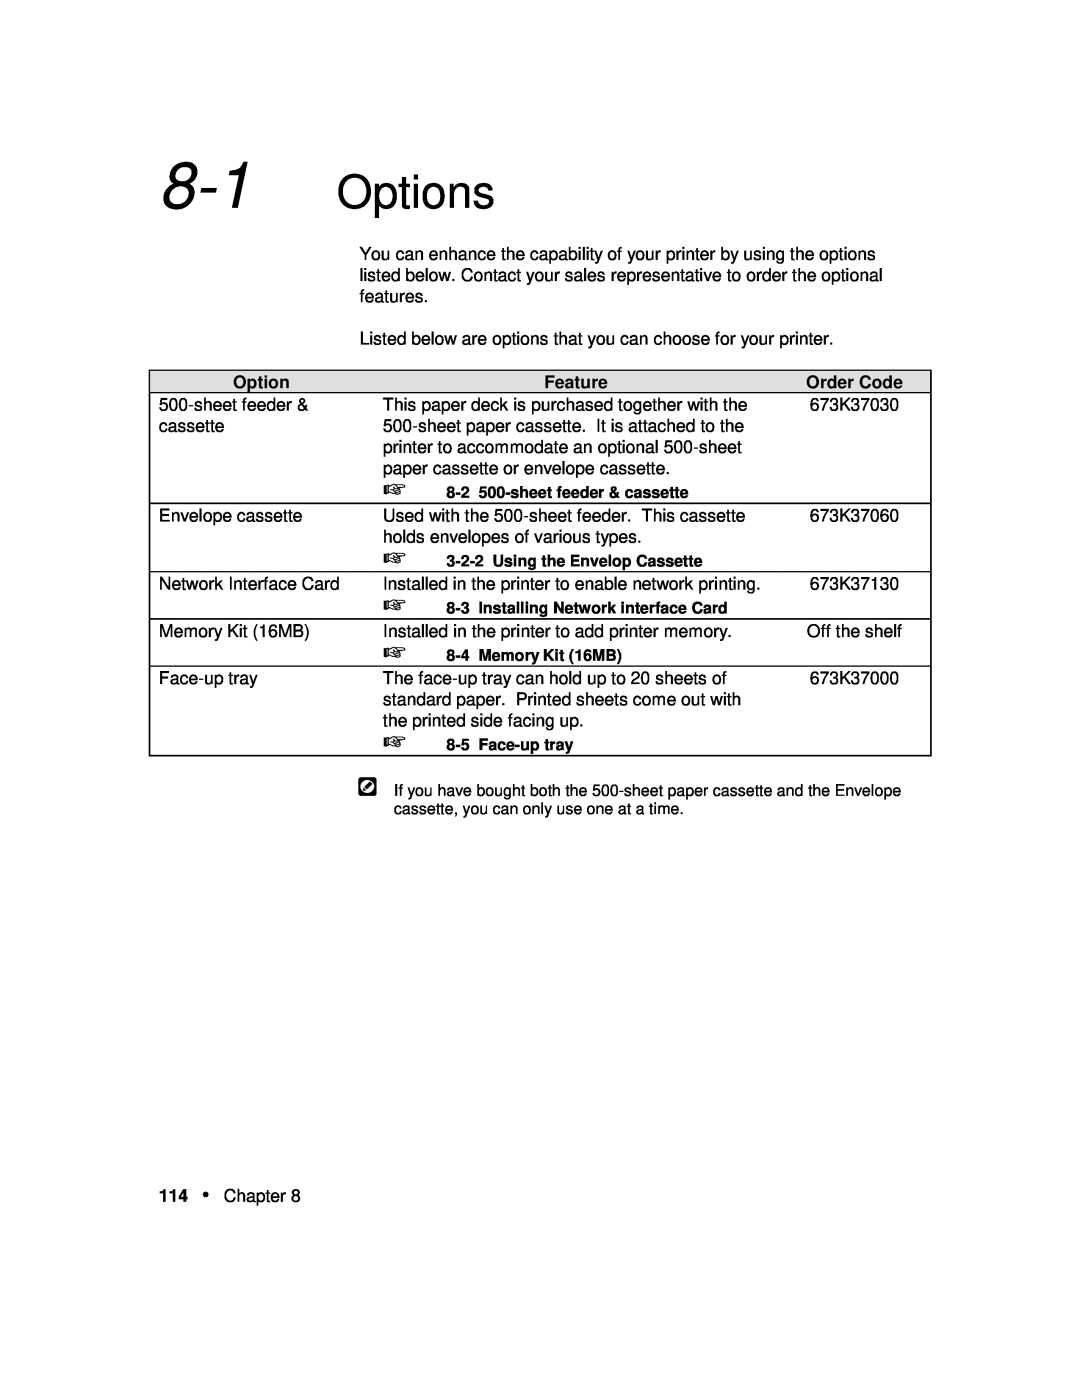 Xerox P12 manual Options, Feature, Order Code 